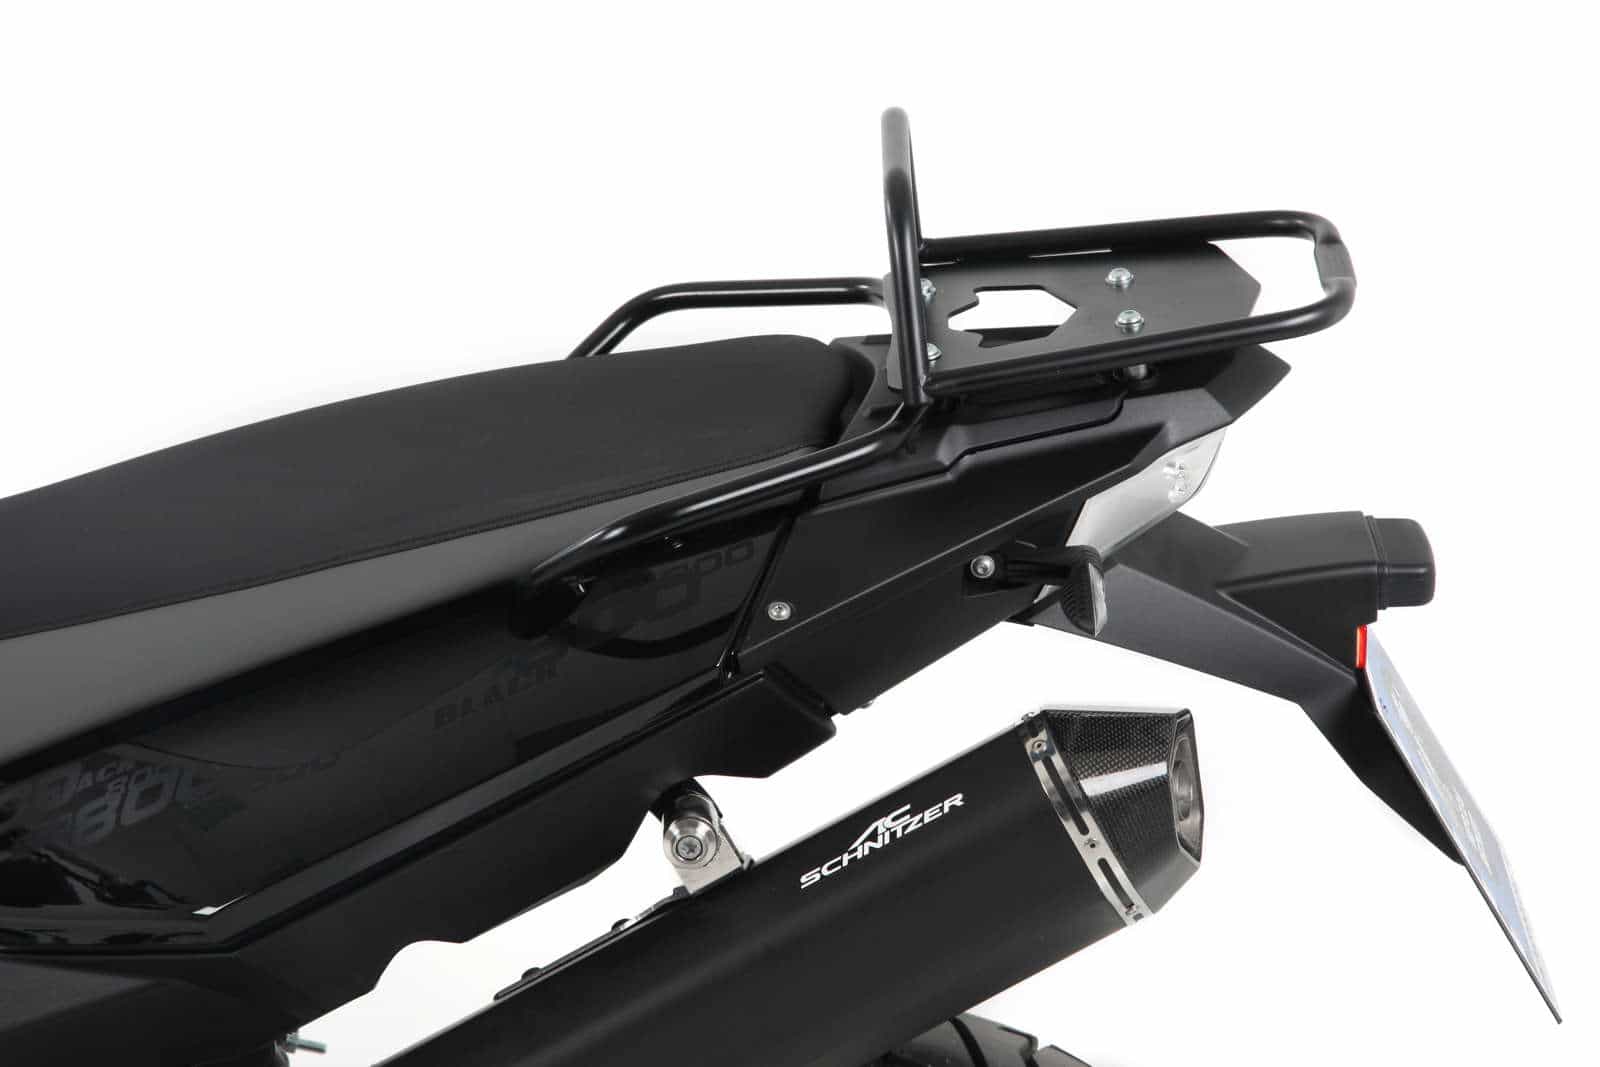 Topcase carrier tube-type black for BMW F 650 GS Twin (2008-2011)/F 700 GS (2012-2017)/F 800 GS (2008-2018)